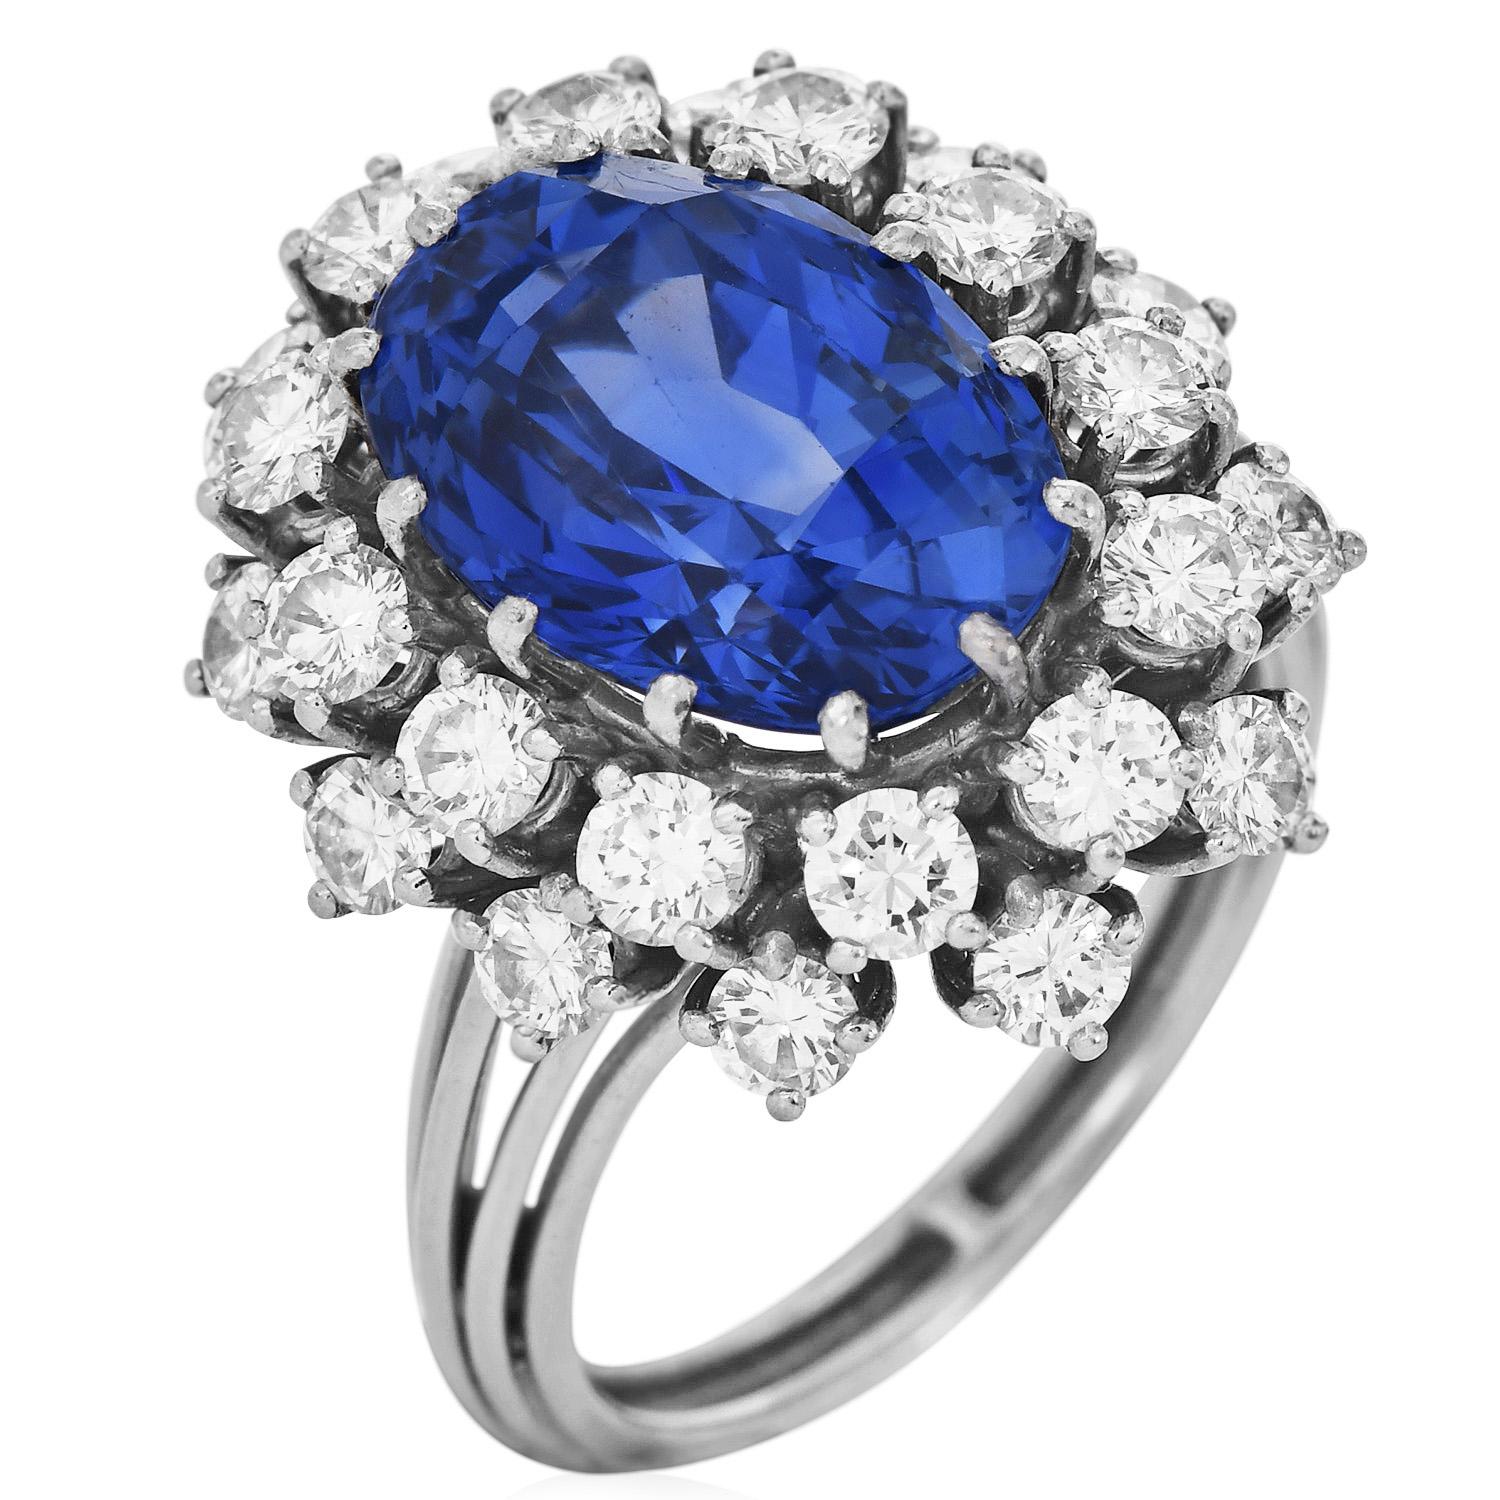 Oval Cut Royal Blue No Heat Natural GIA Ceylon Sapphire 10.50cts Diamond Ring For Sale